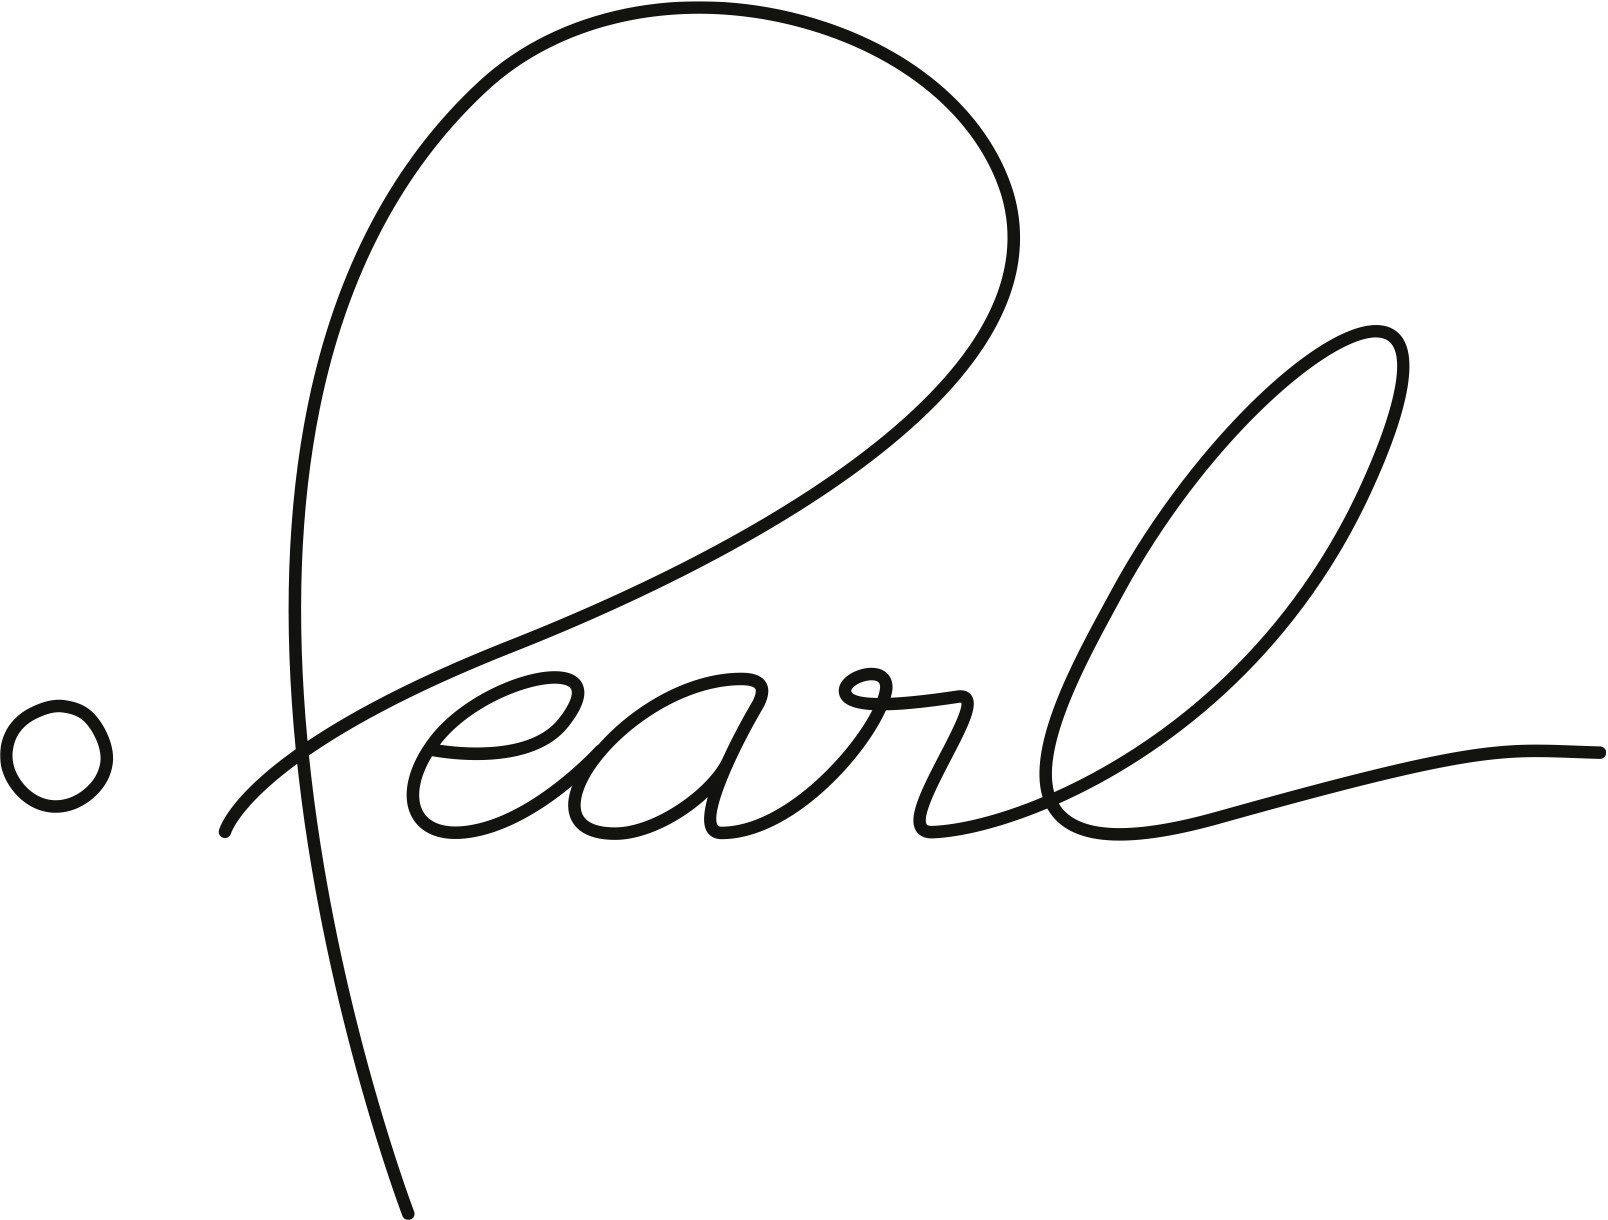 Pearl Granted Patent for AI-Powered Claims Processing Tech